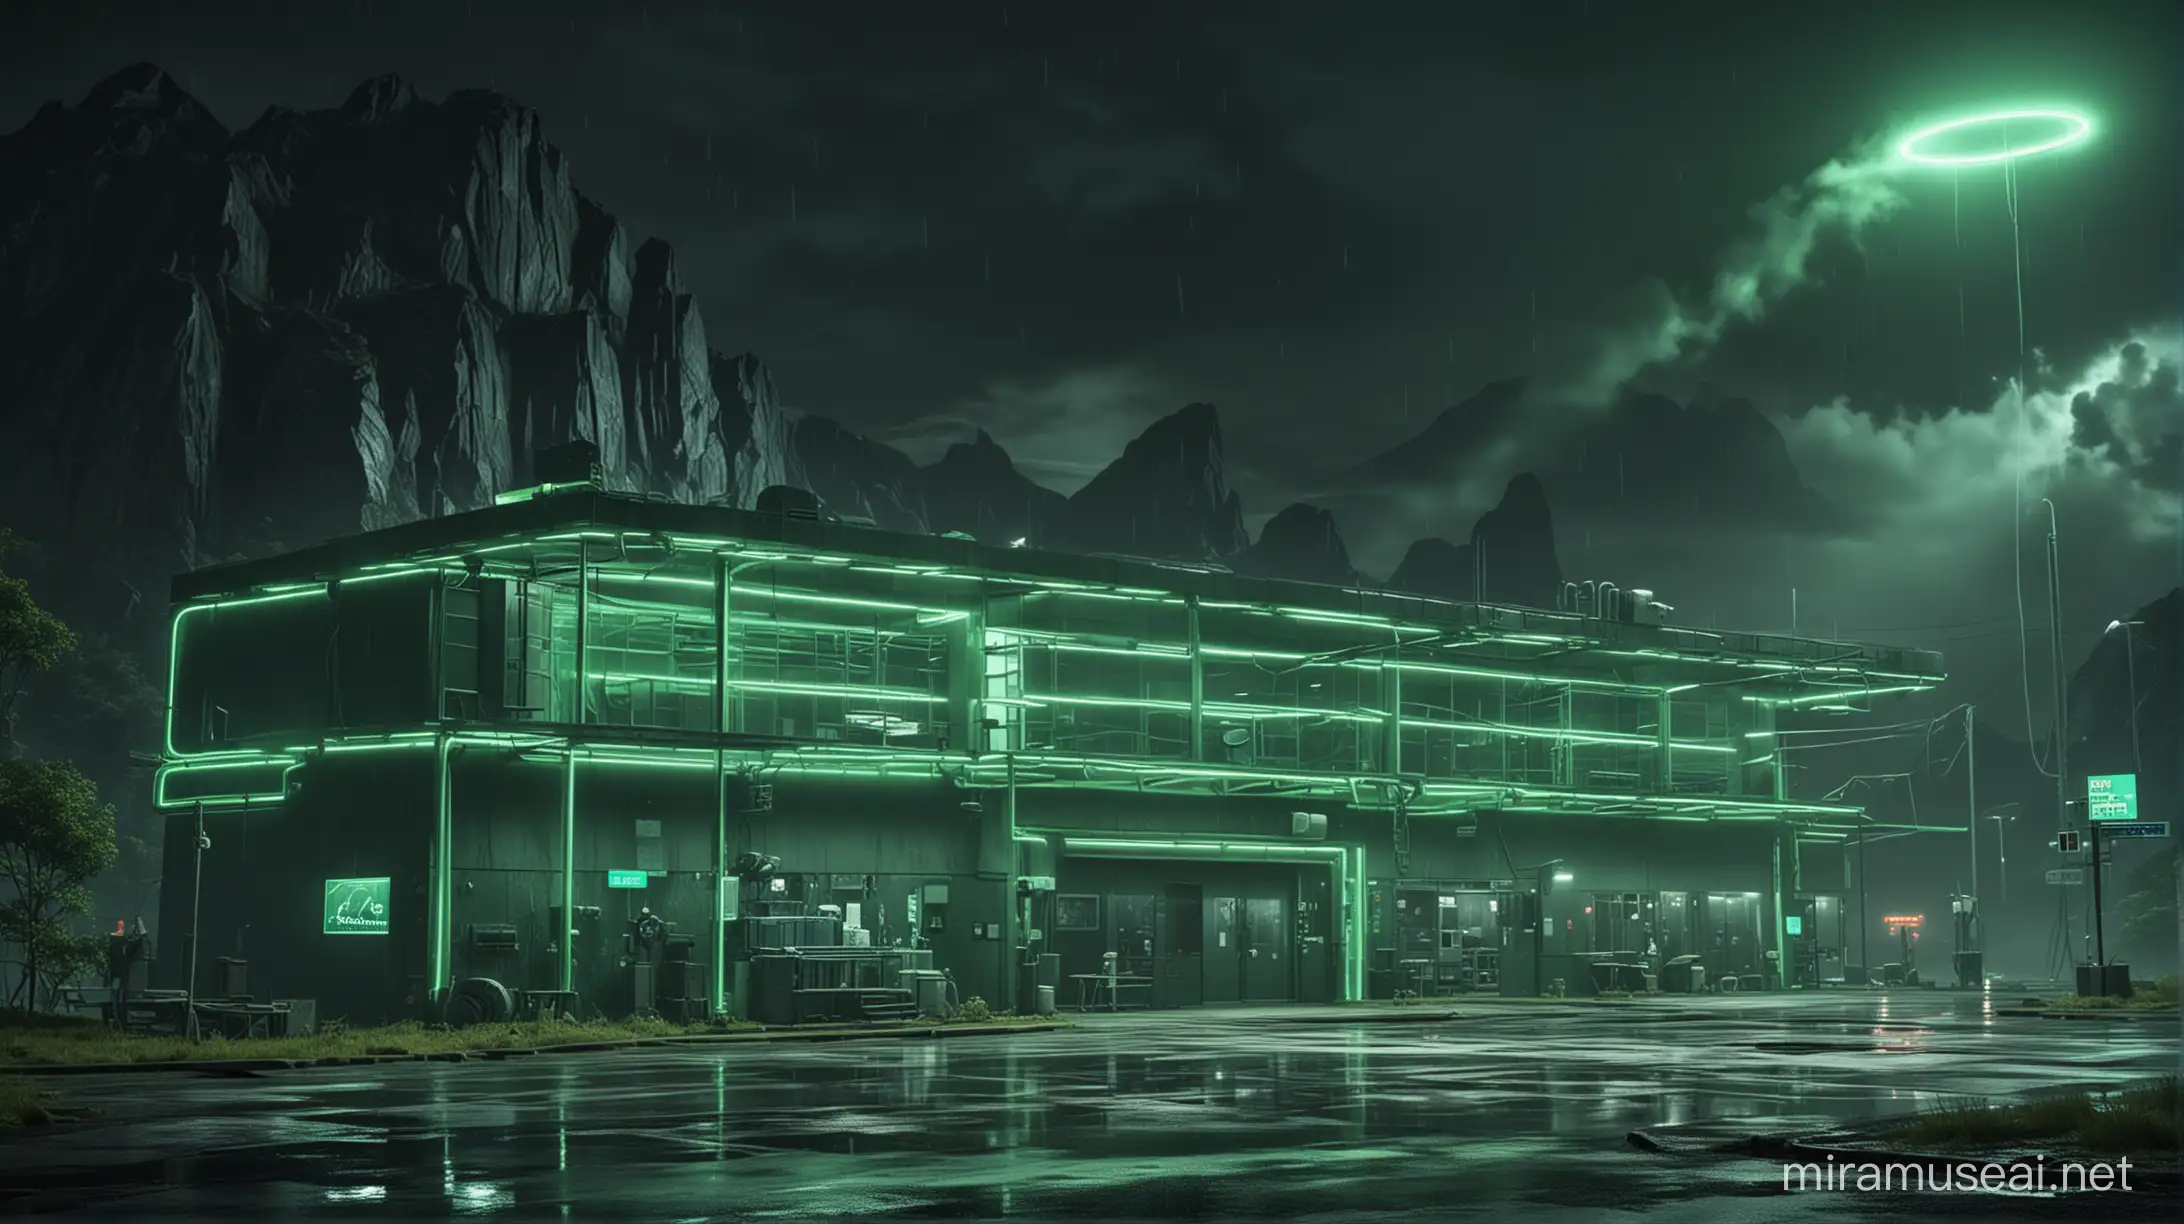 Realistic research centers with one worker around it, green neon and huge neon lights inside the part, its color shadow on the floor, Rainy weather, staff in dark green uniforms and helmets, Atmospheric and cinematic, The huge structures, A dark green smoke rose from the research centers environment and spread in the air, The image space is outside the realistic research center.
with huge satellite antennas,
A huge cubic green neon object,
in the Realistic mountains.
atmospheric and cinematic.
All overall dark green image theme.
Very big lights and lots of green neon lights.
The neon lights in the image should be very bright throughout the image.
The neon lights in the picture should be very bright in the dark
The neon lights in the picture should be very bright.
Very large and bright neon lamps in the structure.
Shades of green throughout the image.
3D.